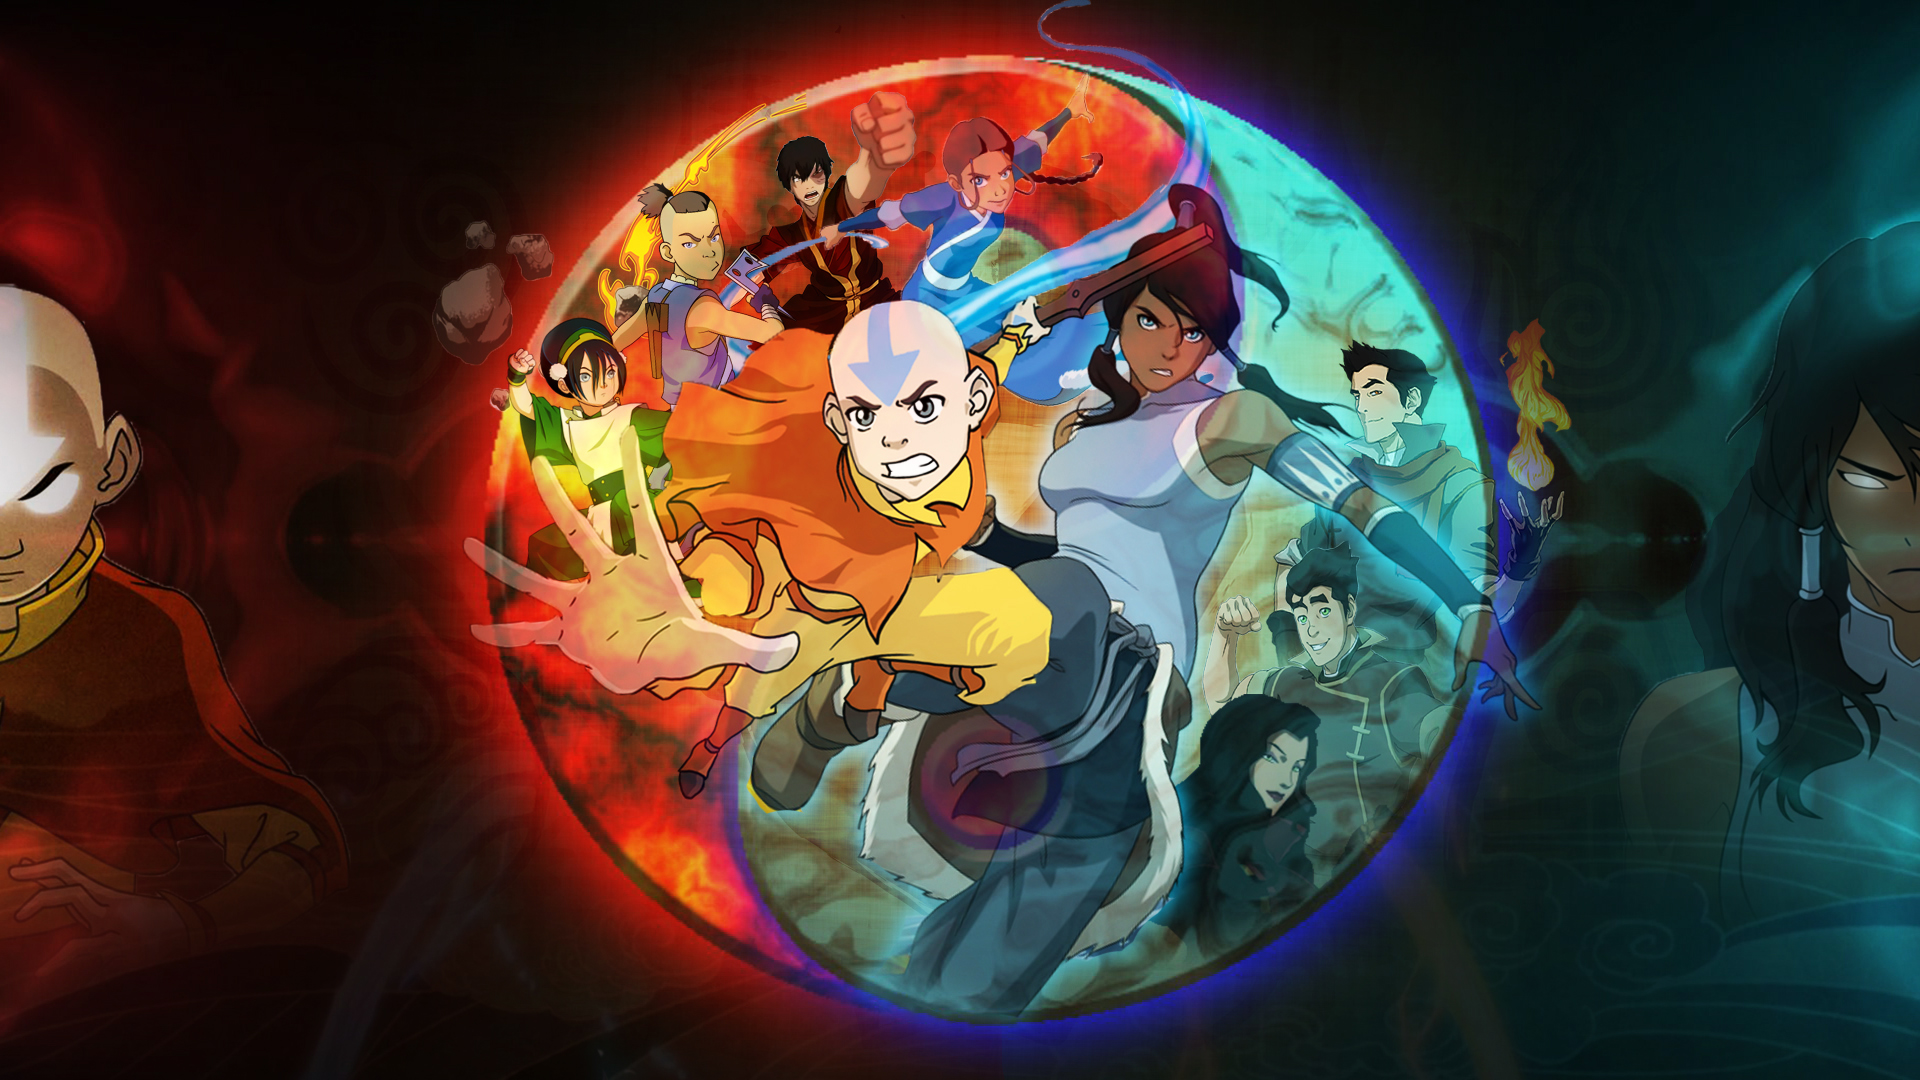 Avatar the last airbender wallpaper by thekingblader on